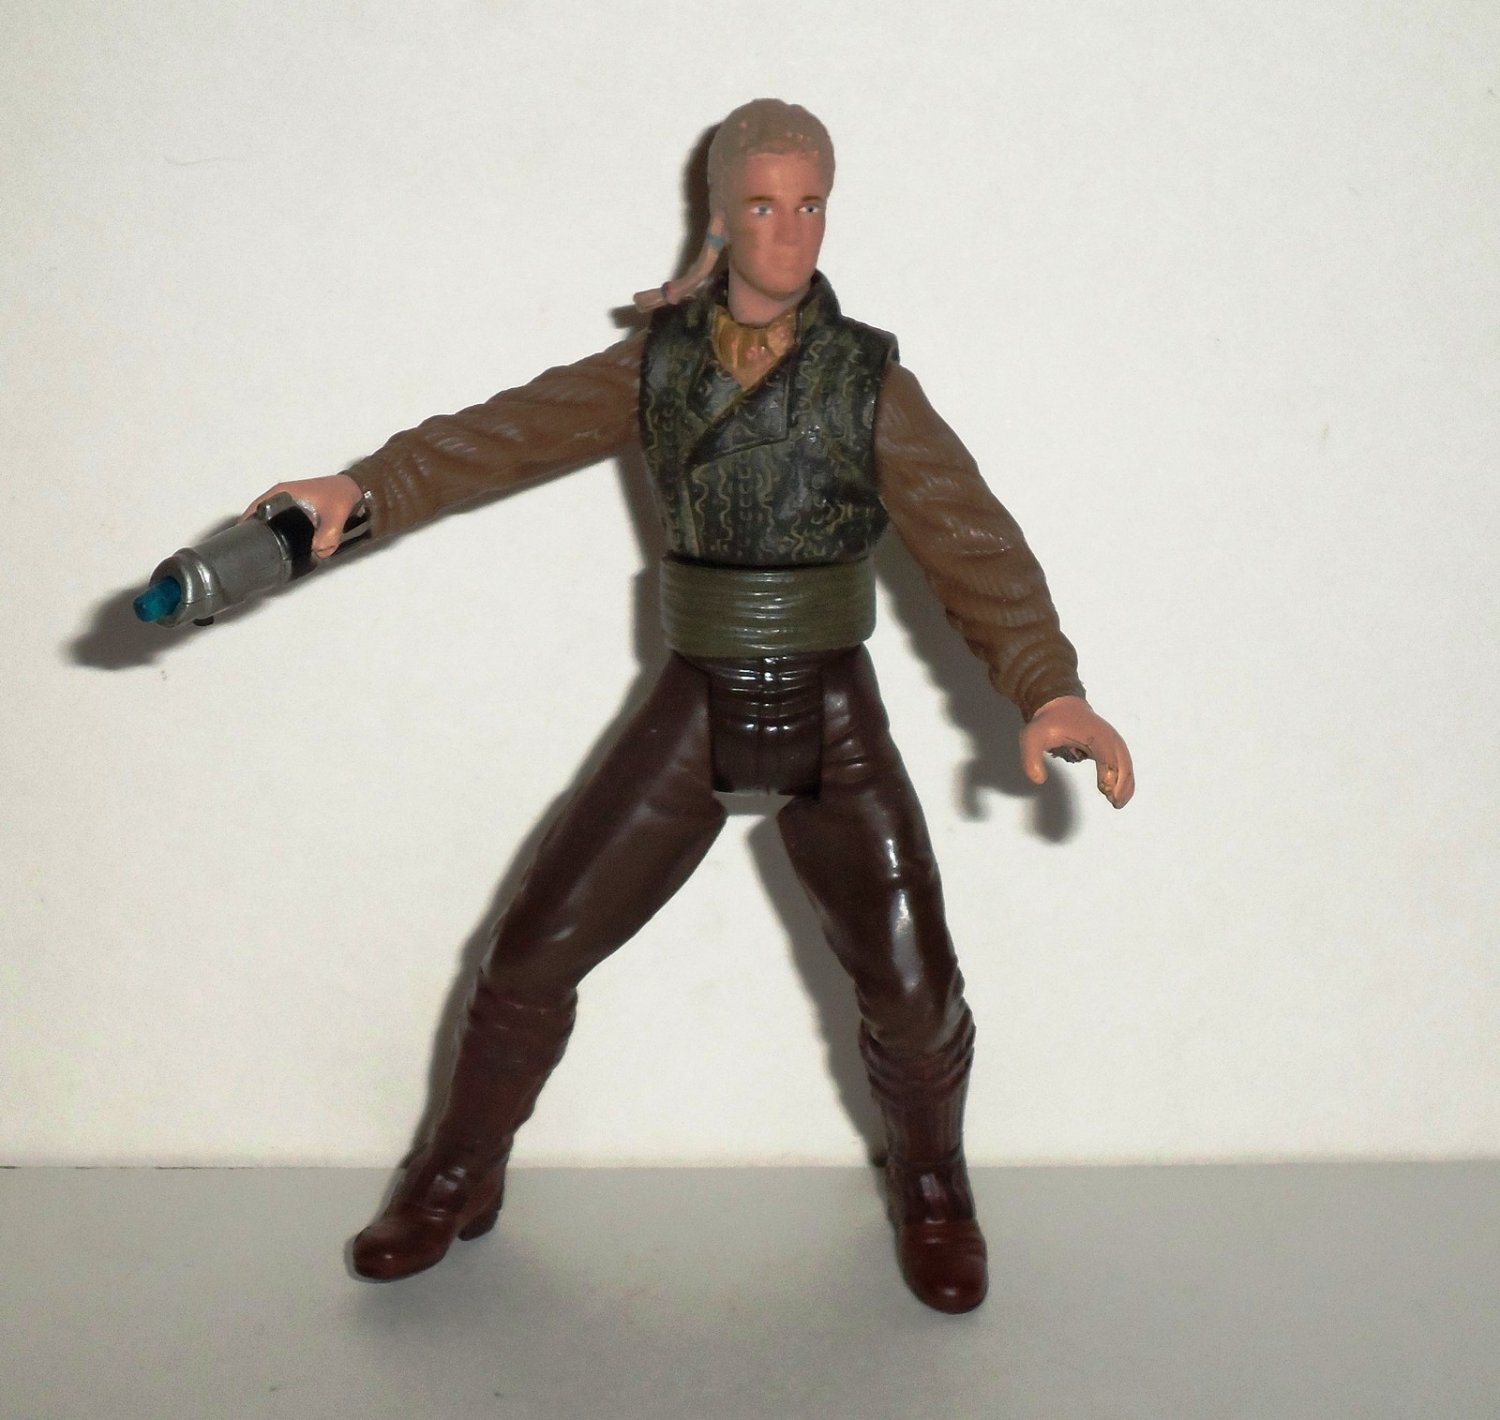 Hasbro Star Wars Attack Of The Clones Anakin Skywalker Outland Peasant Disguise Action Figure for sale online